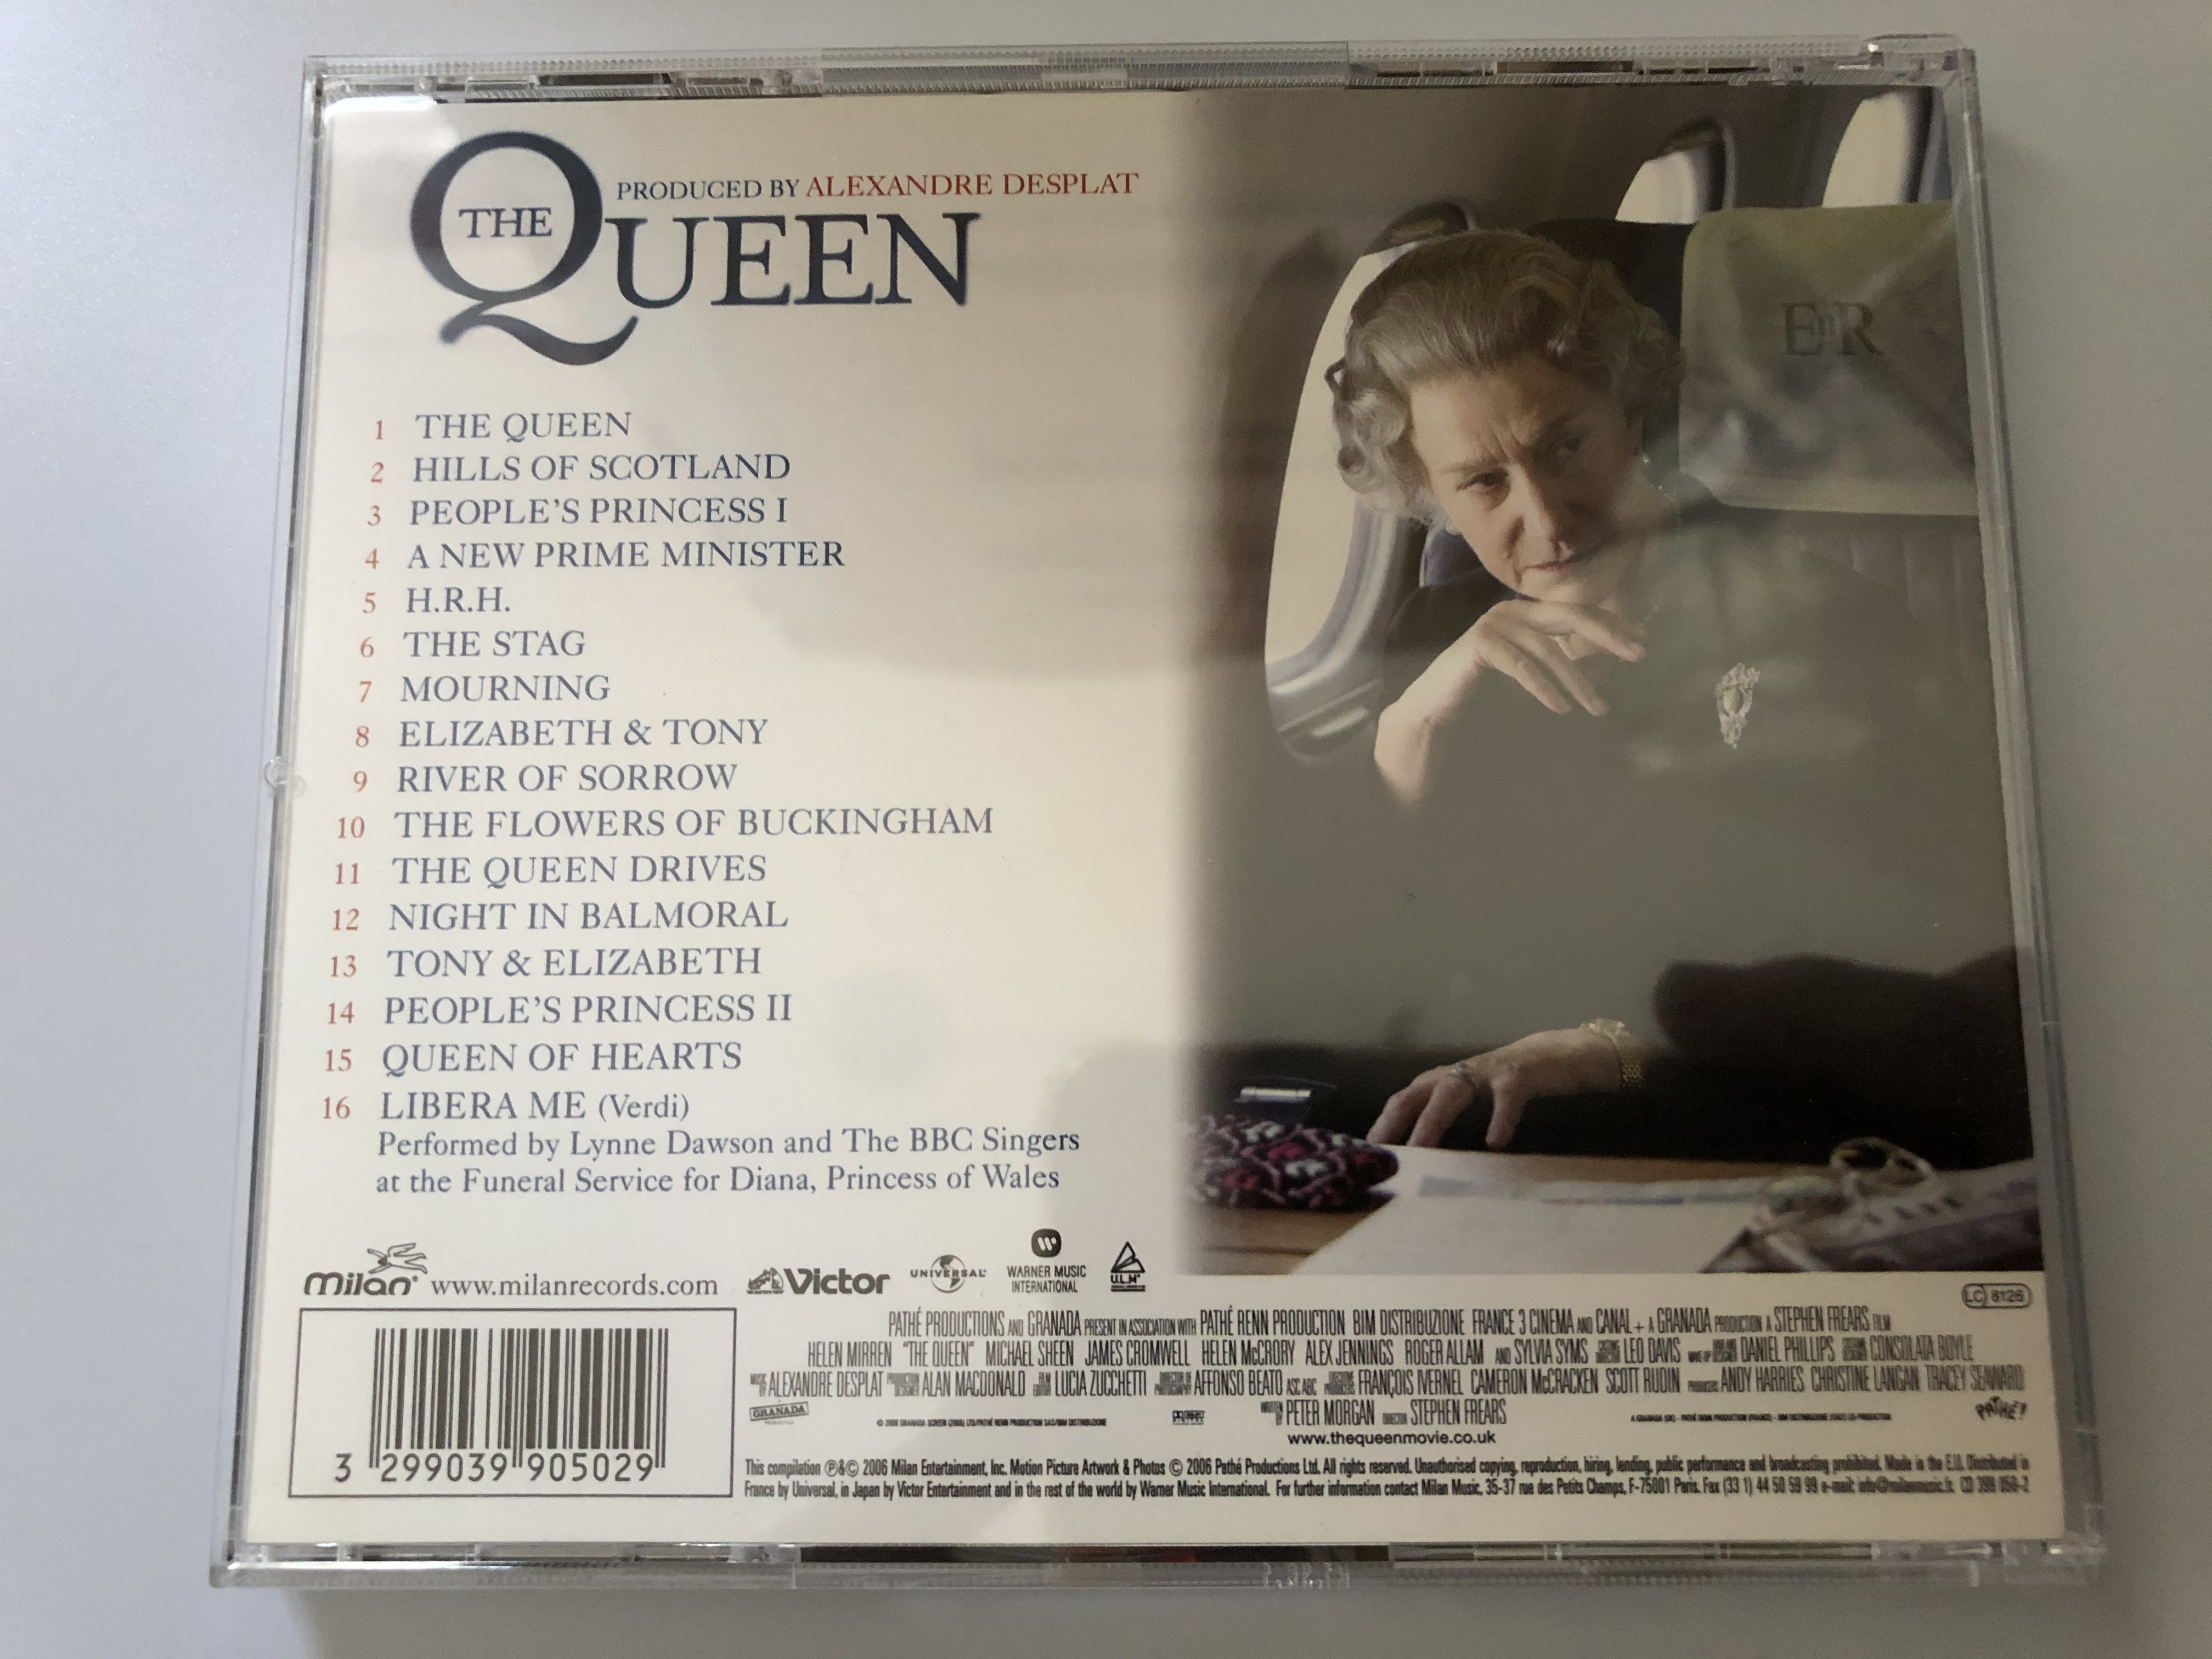 the-queen-music-by-alexandre-desplat-peformed-by-the-london-symphony-orchestra-milan-audio-cd-2006-399-050-2-5-.jpg